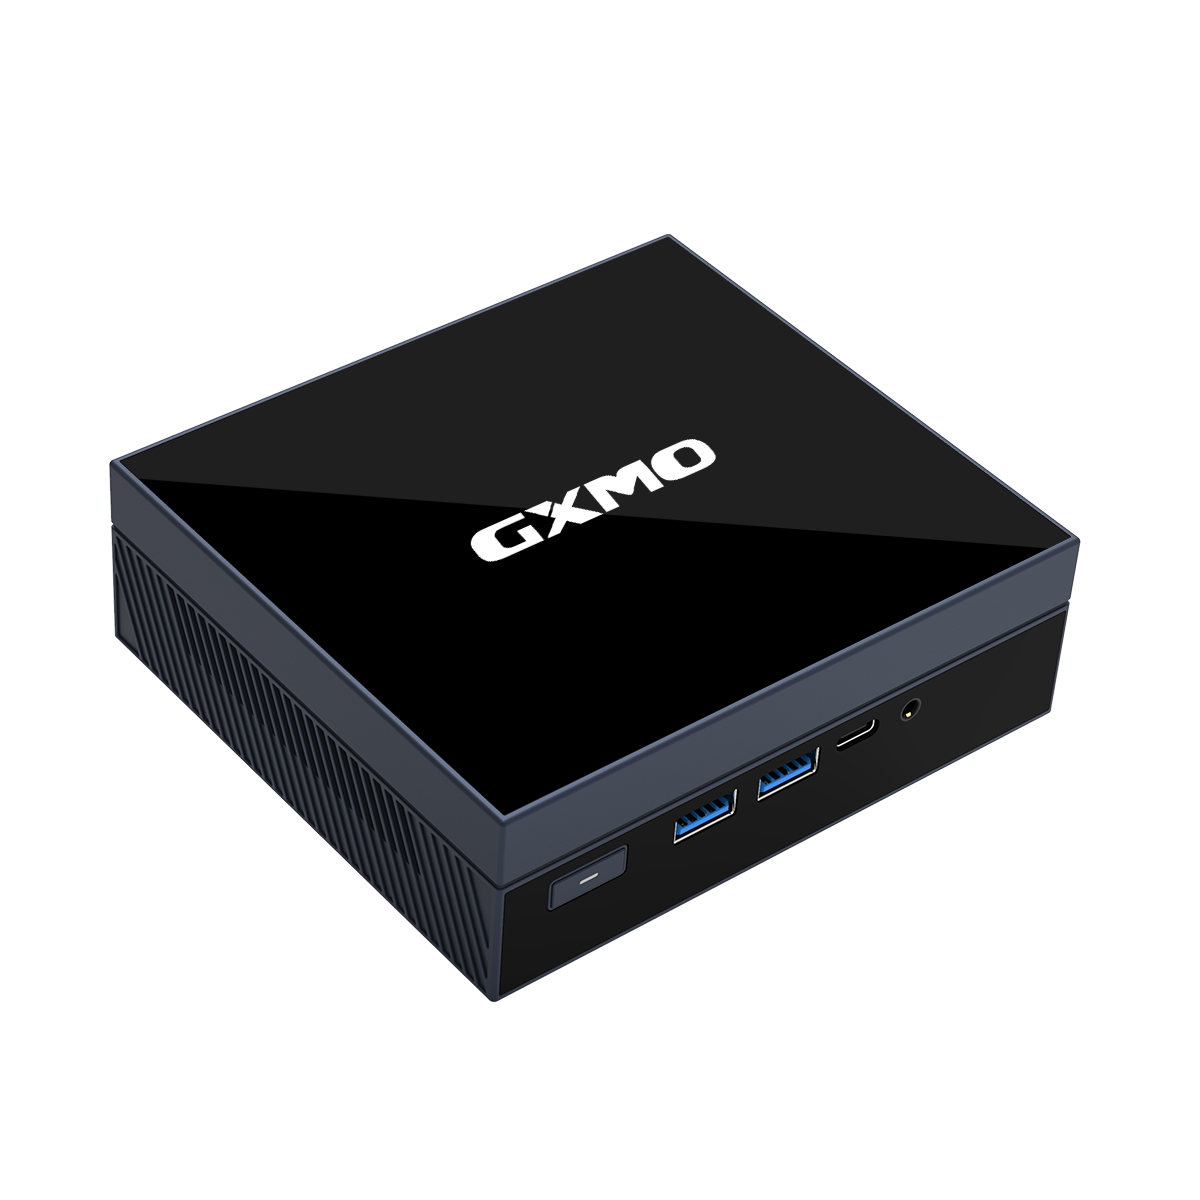 Find GXMO GX55 Intel 11th Jasper Laker N5105 Mini PC 8GB DDR4 RAM 256GB NVMe SSD Quad Core 2 0GHz to 2 9GHz WiFi5 BT4 2 1000M LAN HDMI Type C Trible Screen 4K HD 60 FPS Windows10 Mini Computer for Sale on Gipsybee.com with cryptocurrencies